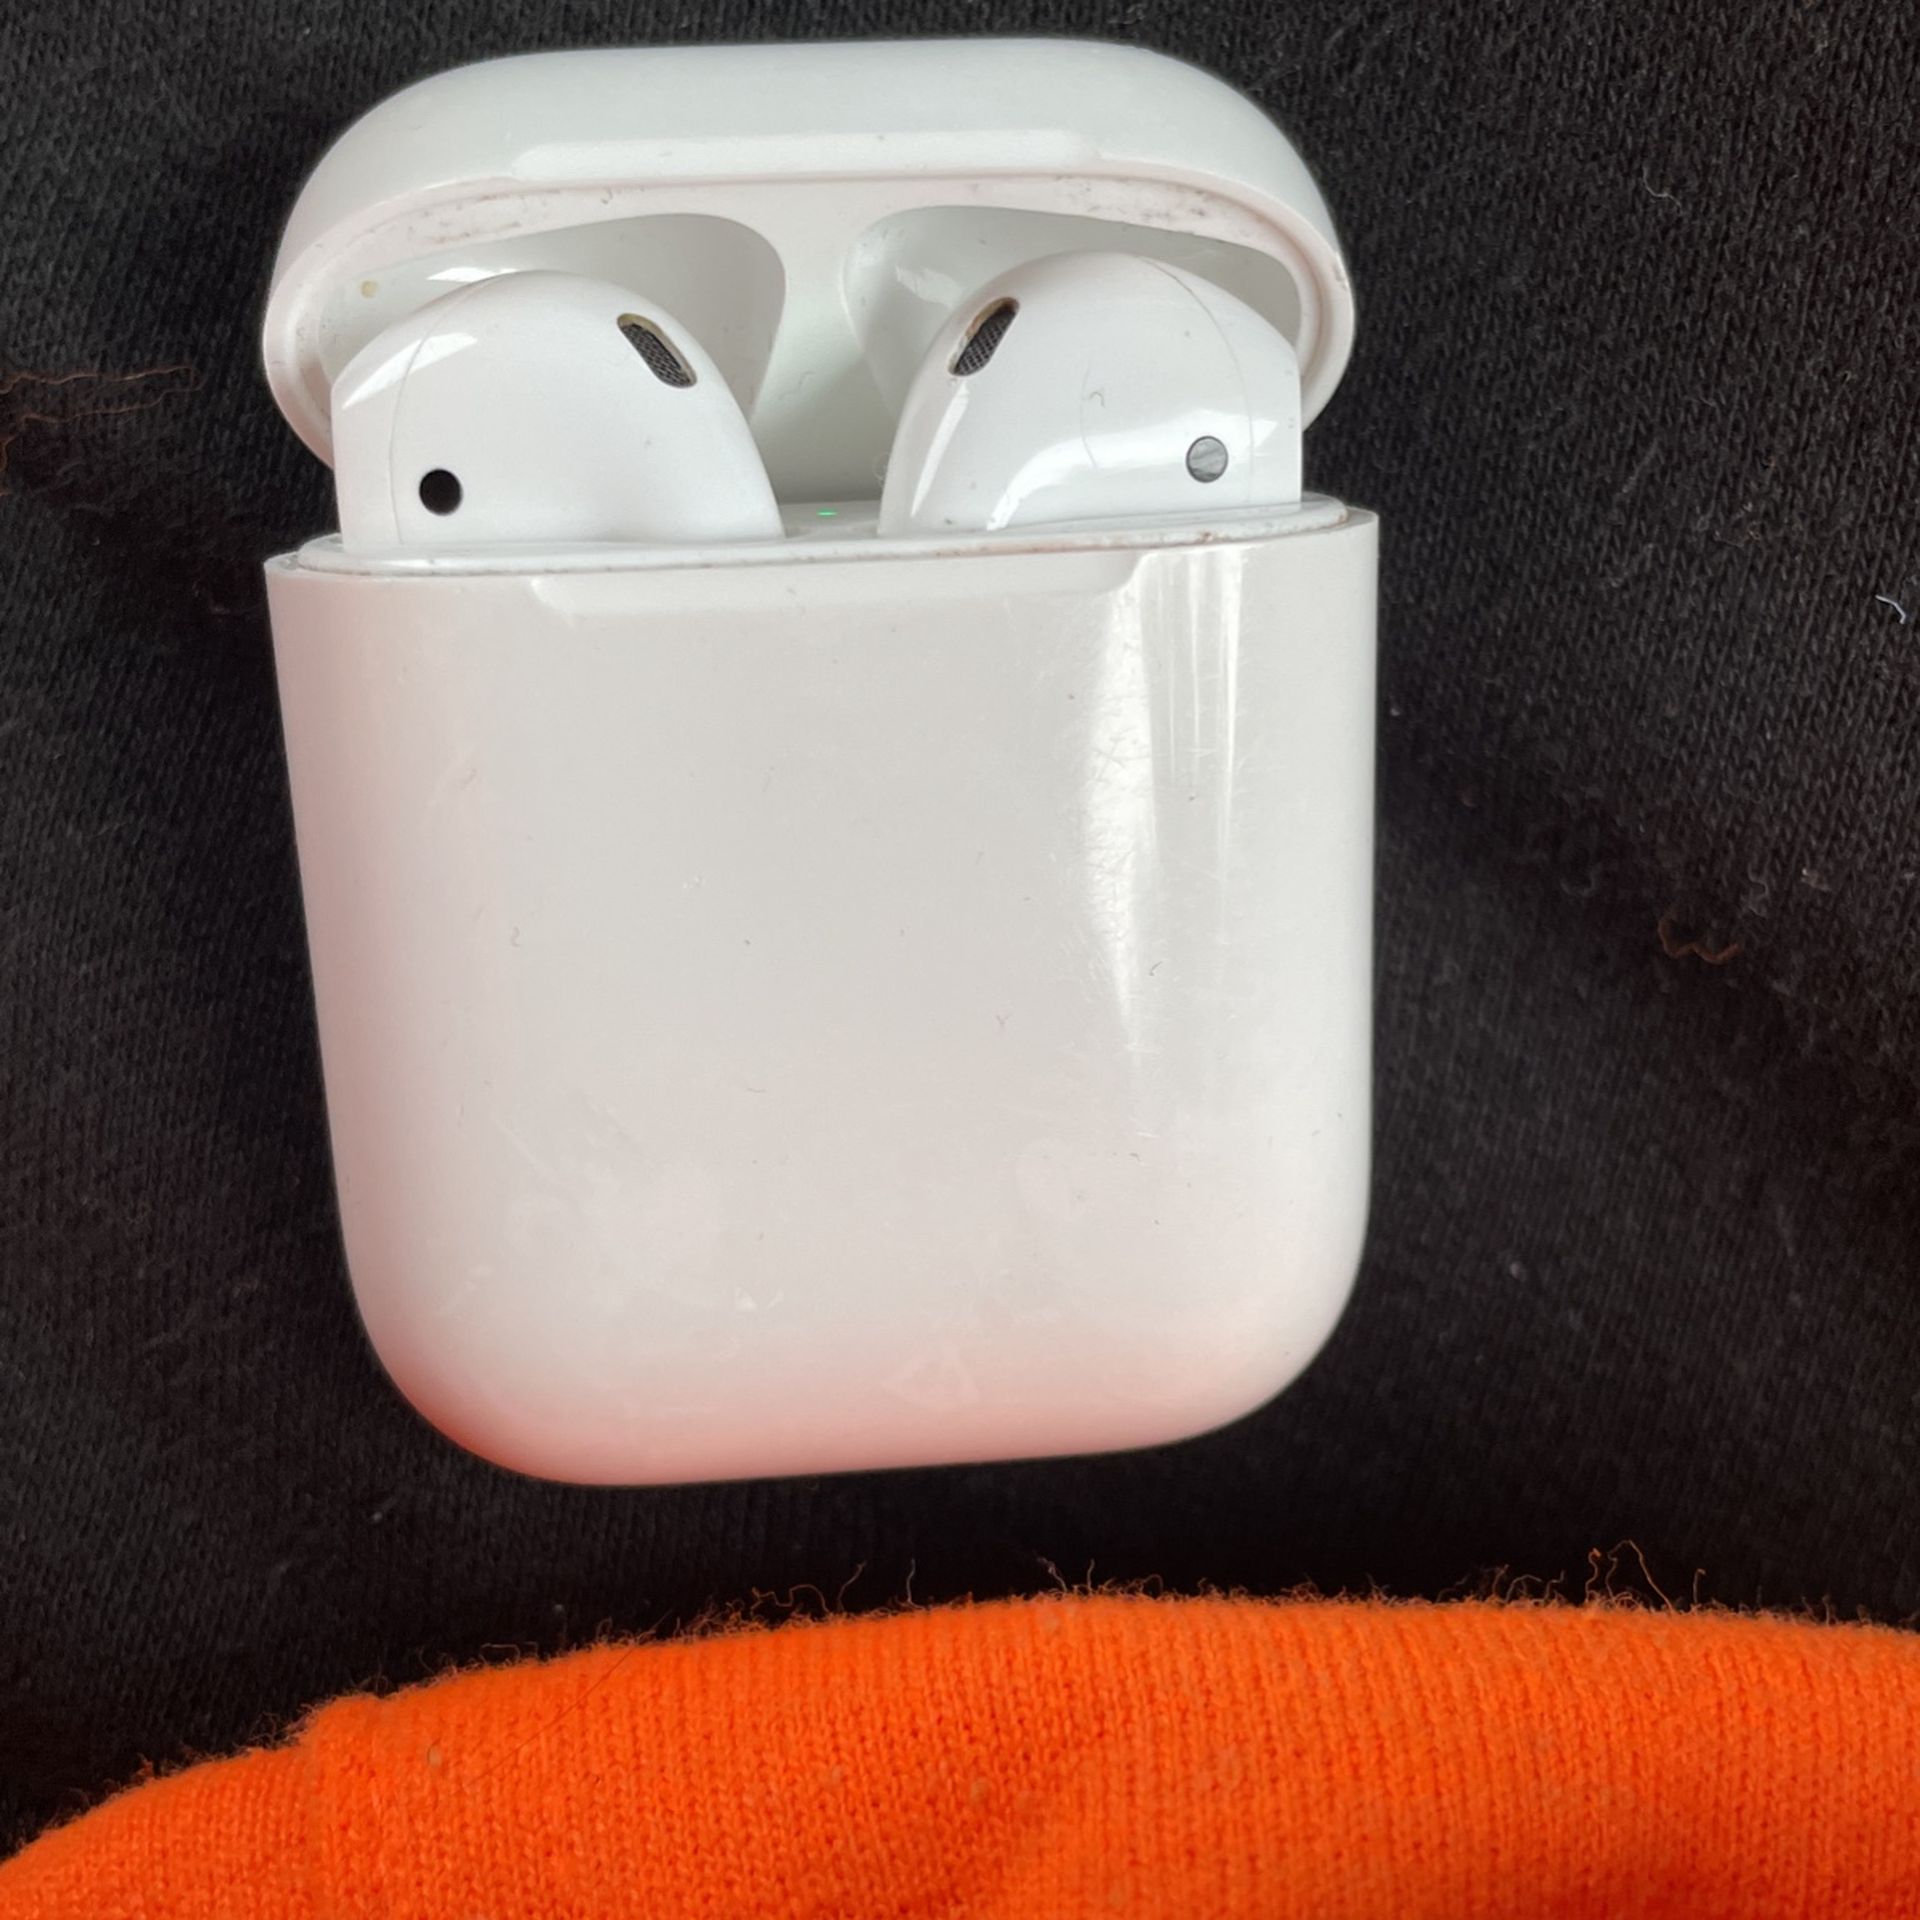 Apple Airpods 2nd generation with 2 Charging Cases